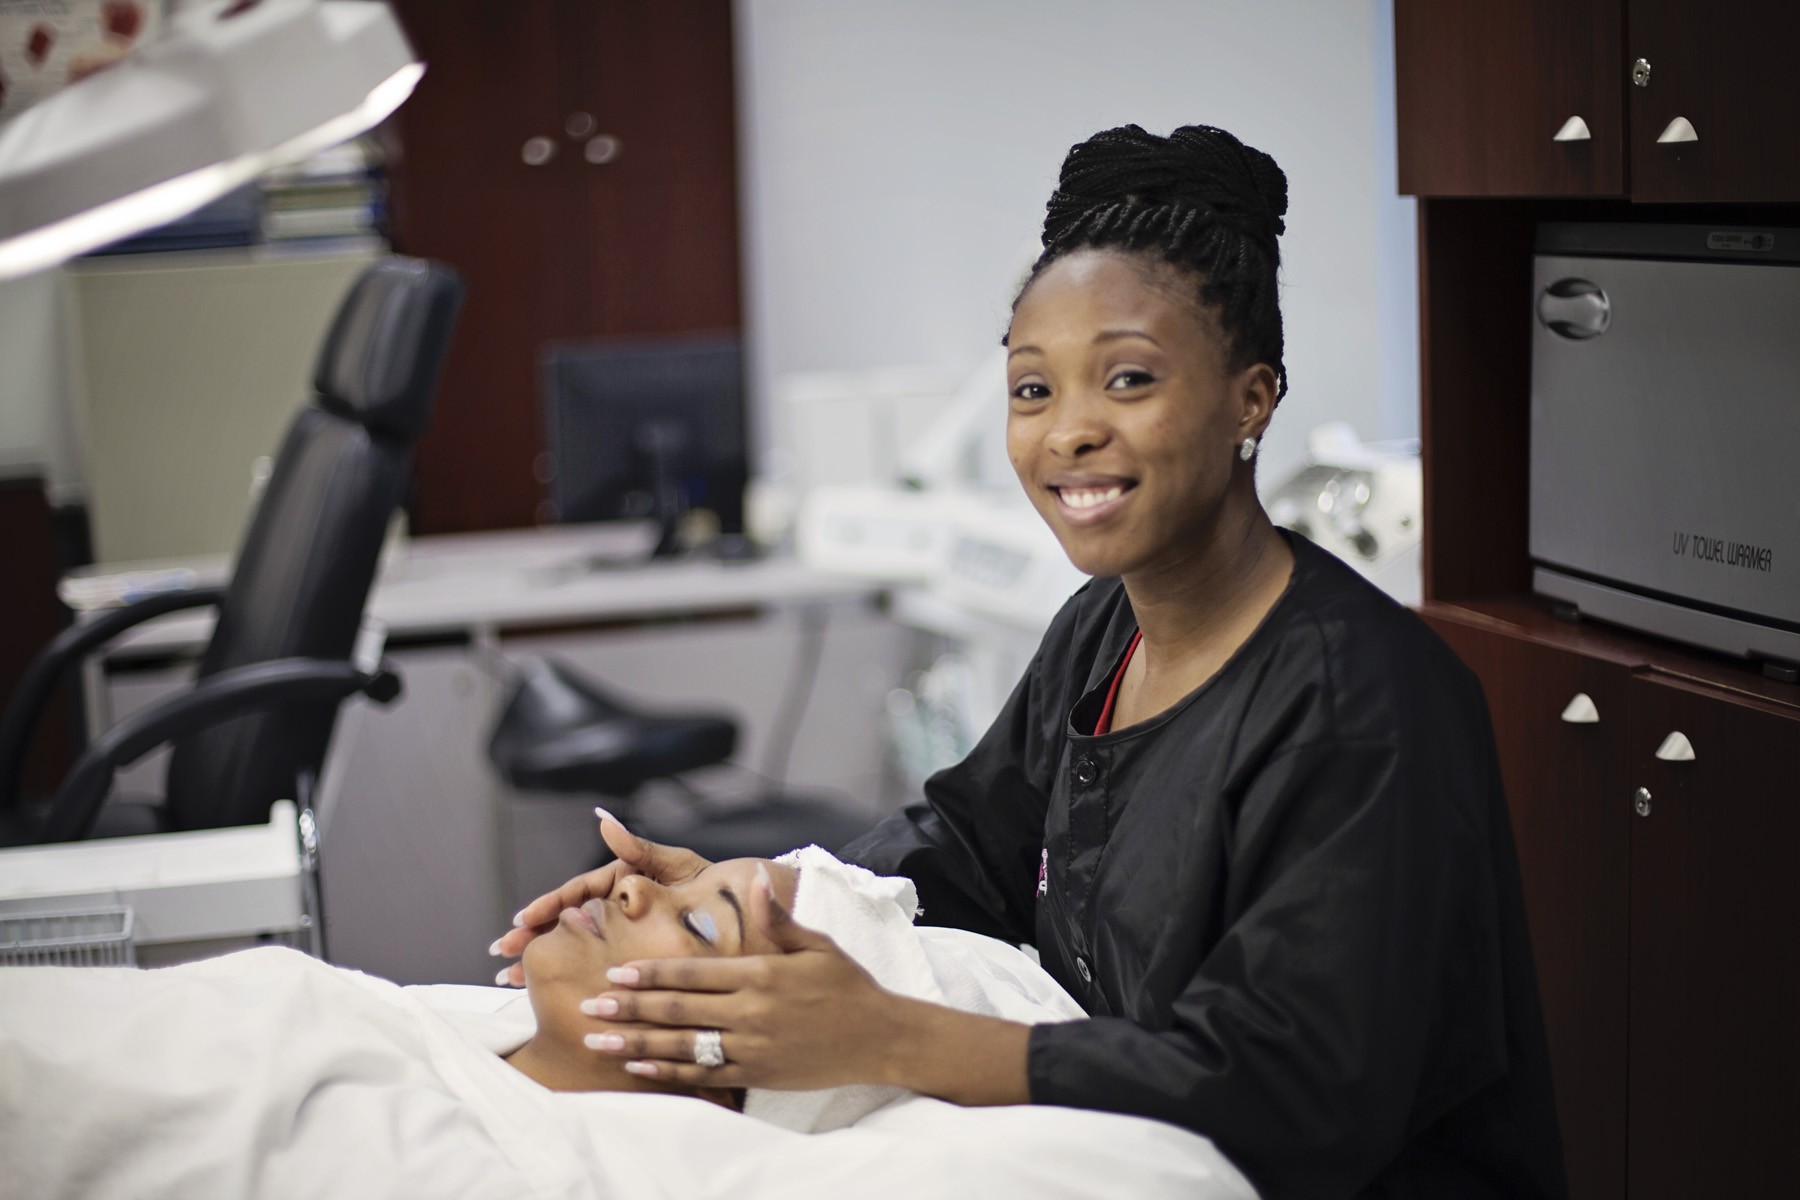 Learn more about Esthetics Services offered at SRTC-Moultrie